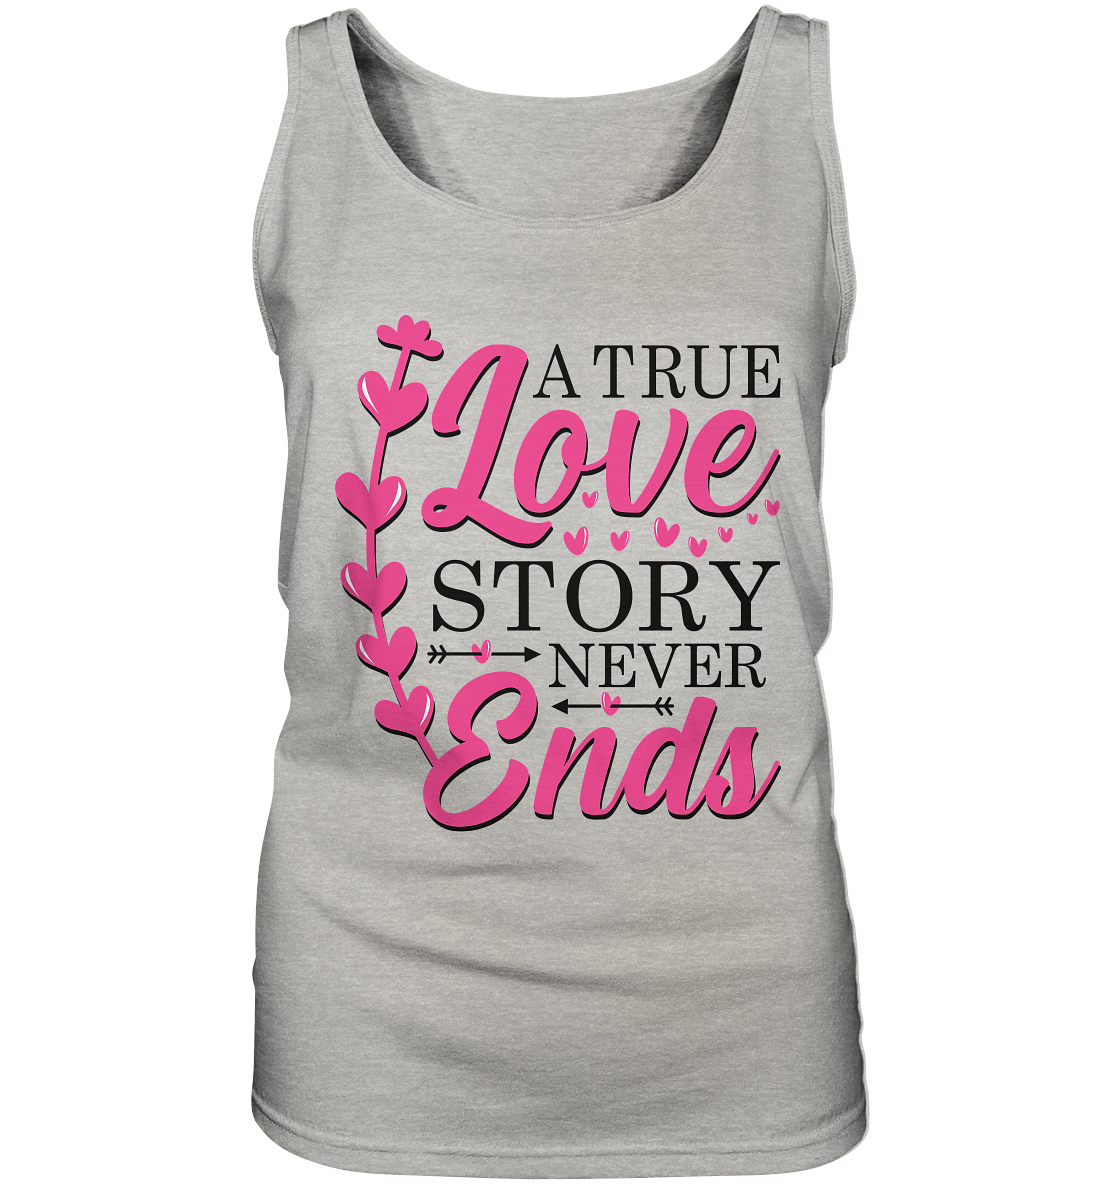 A True Love Story Never Ends - Ladies Tank-Top